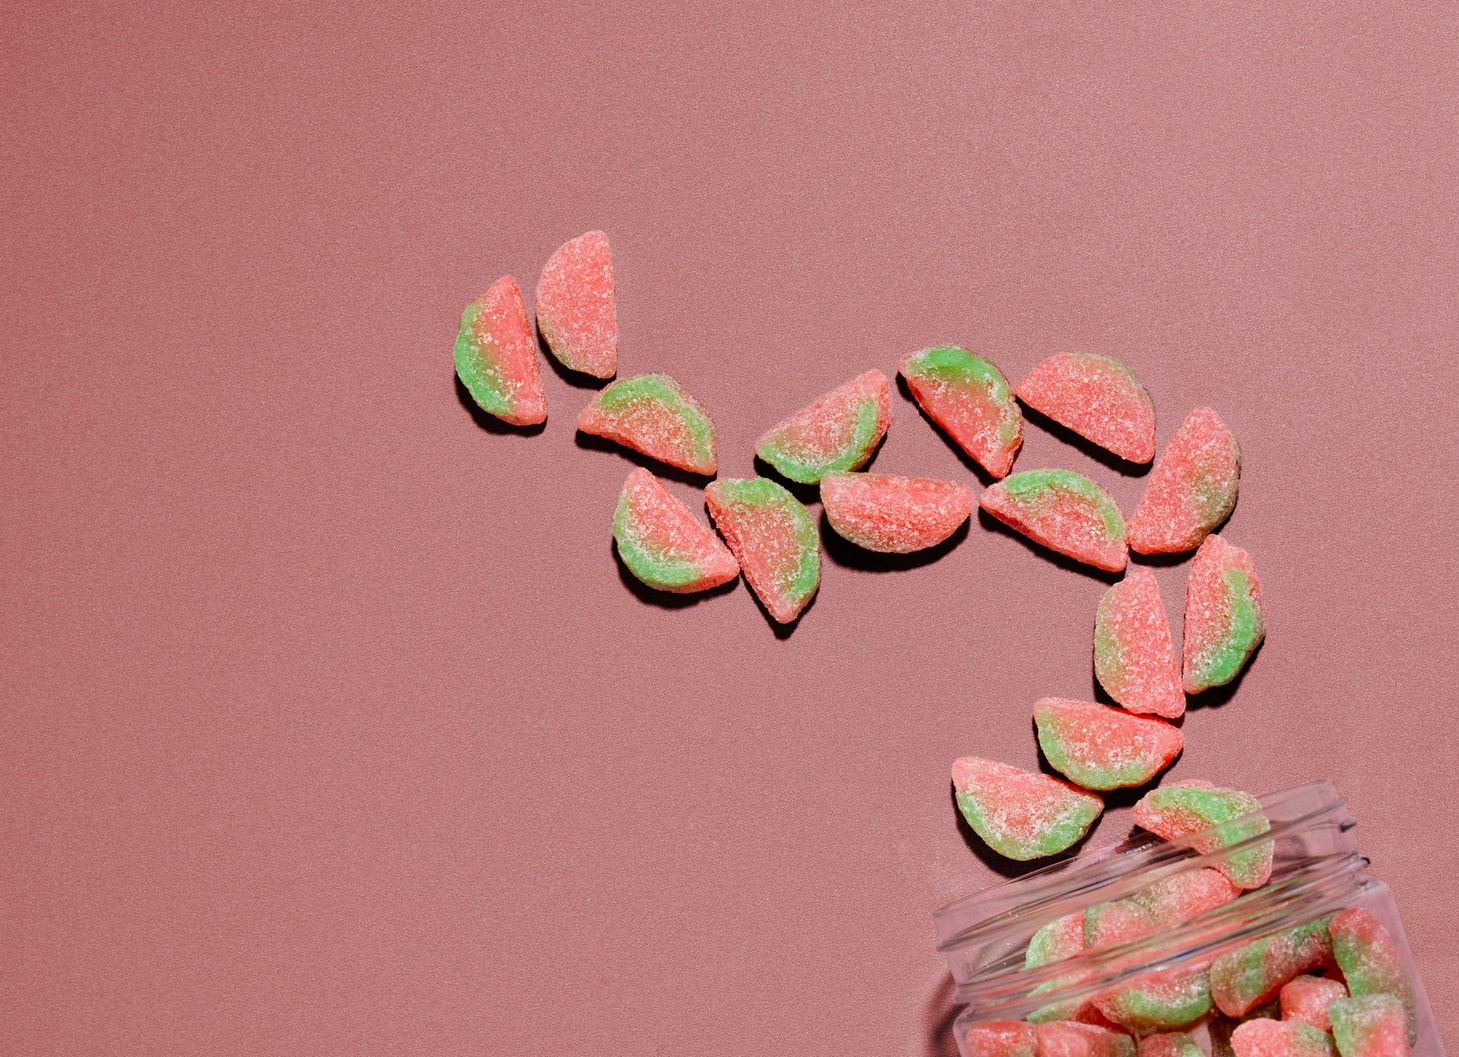 a jar of candy on a pink surface